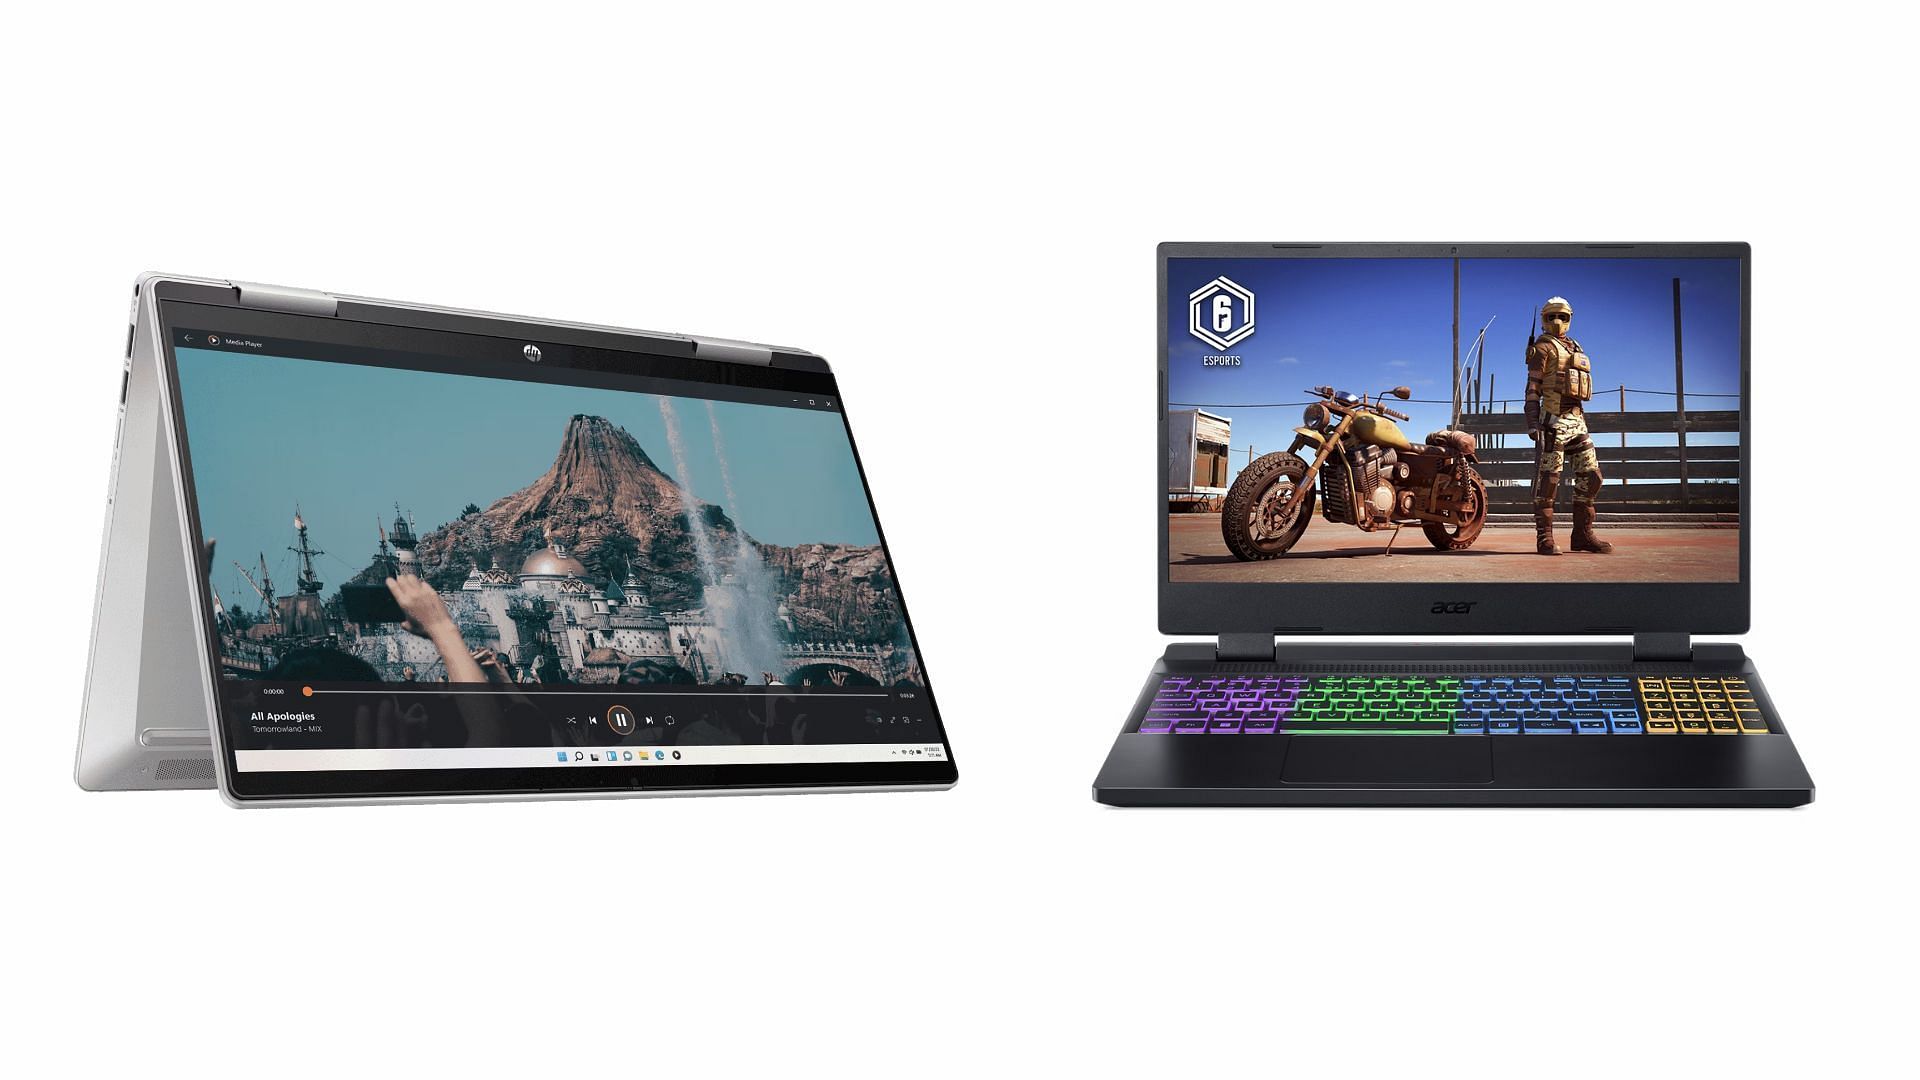 Both companies are well reputed manufacturers in laptop space (Image via Acer and HP)